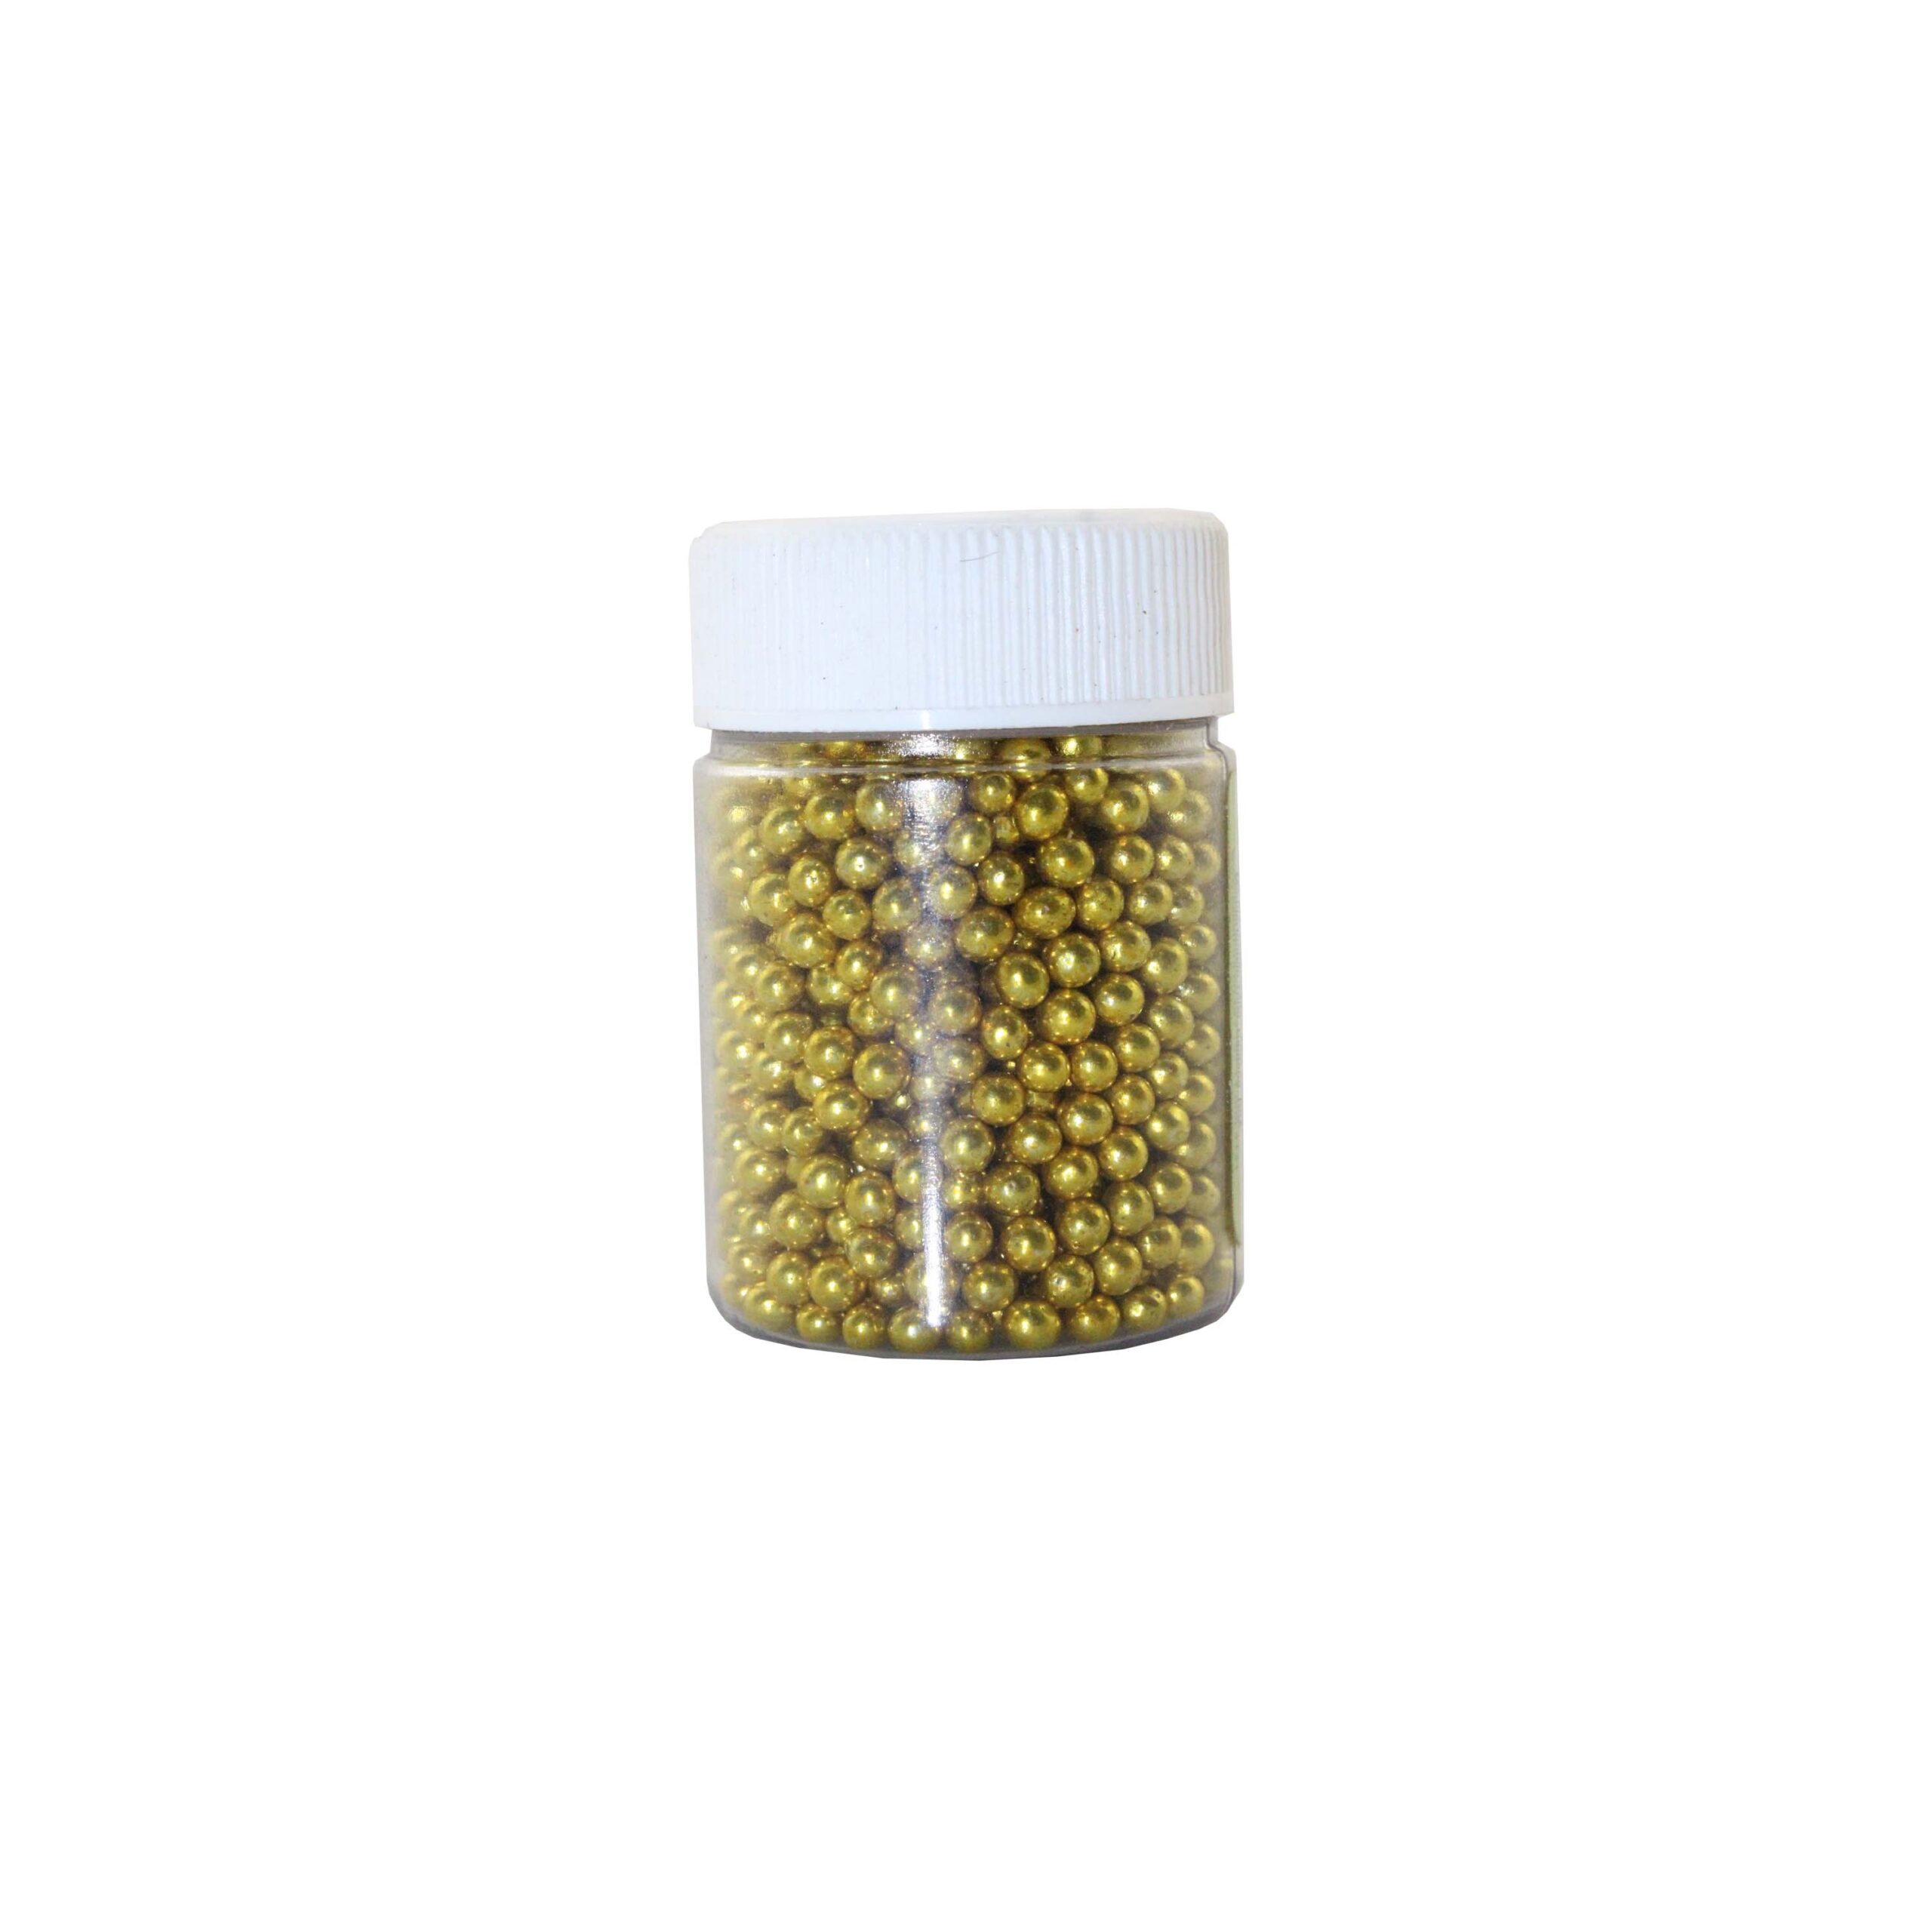 CAKE FLORA DRAGEES GOLD 4mm 40g